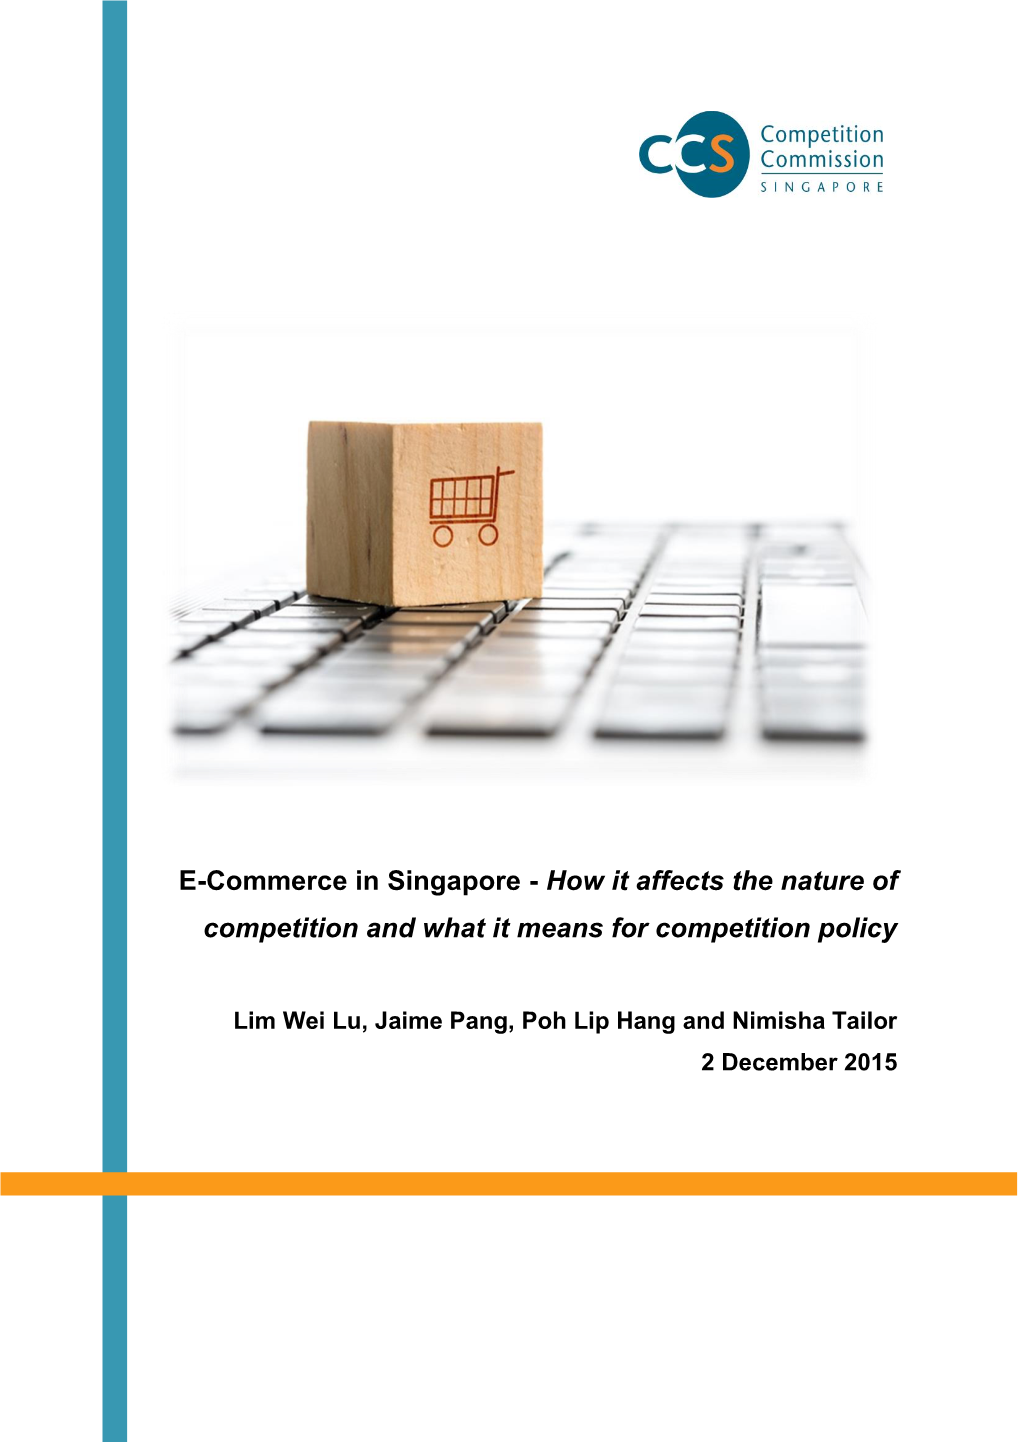 E-Commerce in Singapore - How It Affects the Nature of Competition and What It Means for Competition Policy